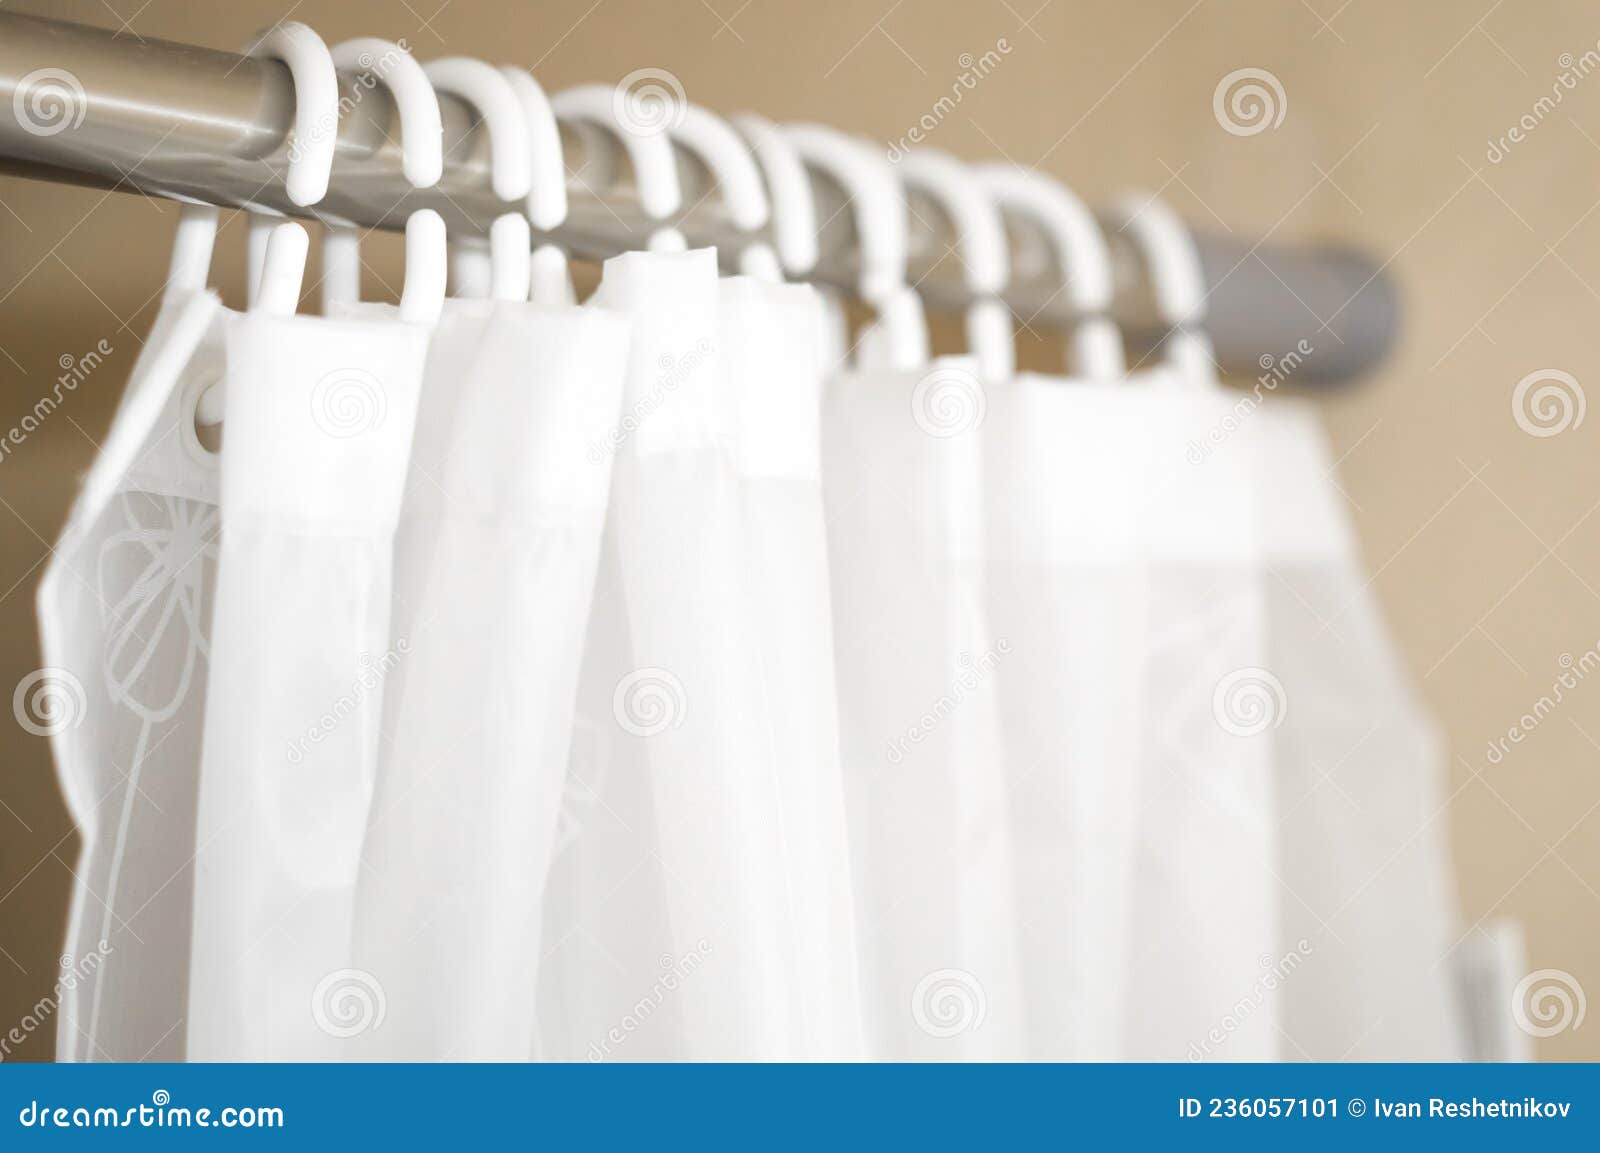 Blurred White Plastic Hooks Curtains for Bath. Hooks on an Aluminum Rod for  Bathroom Curtains Stock Image - Image of material, curtain: 236057101